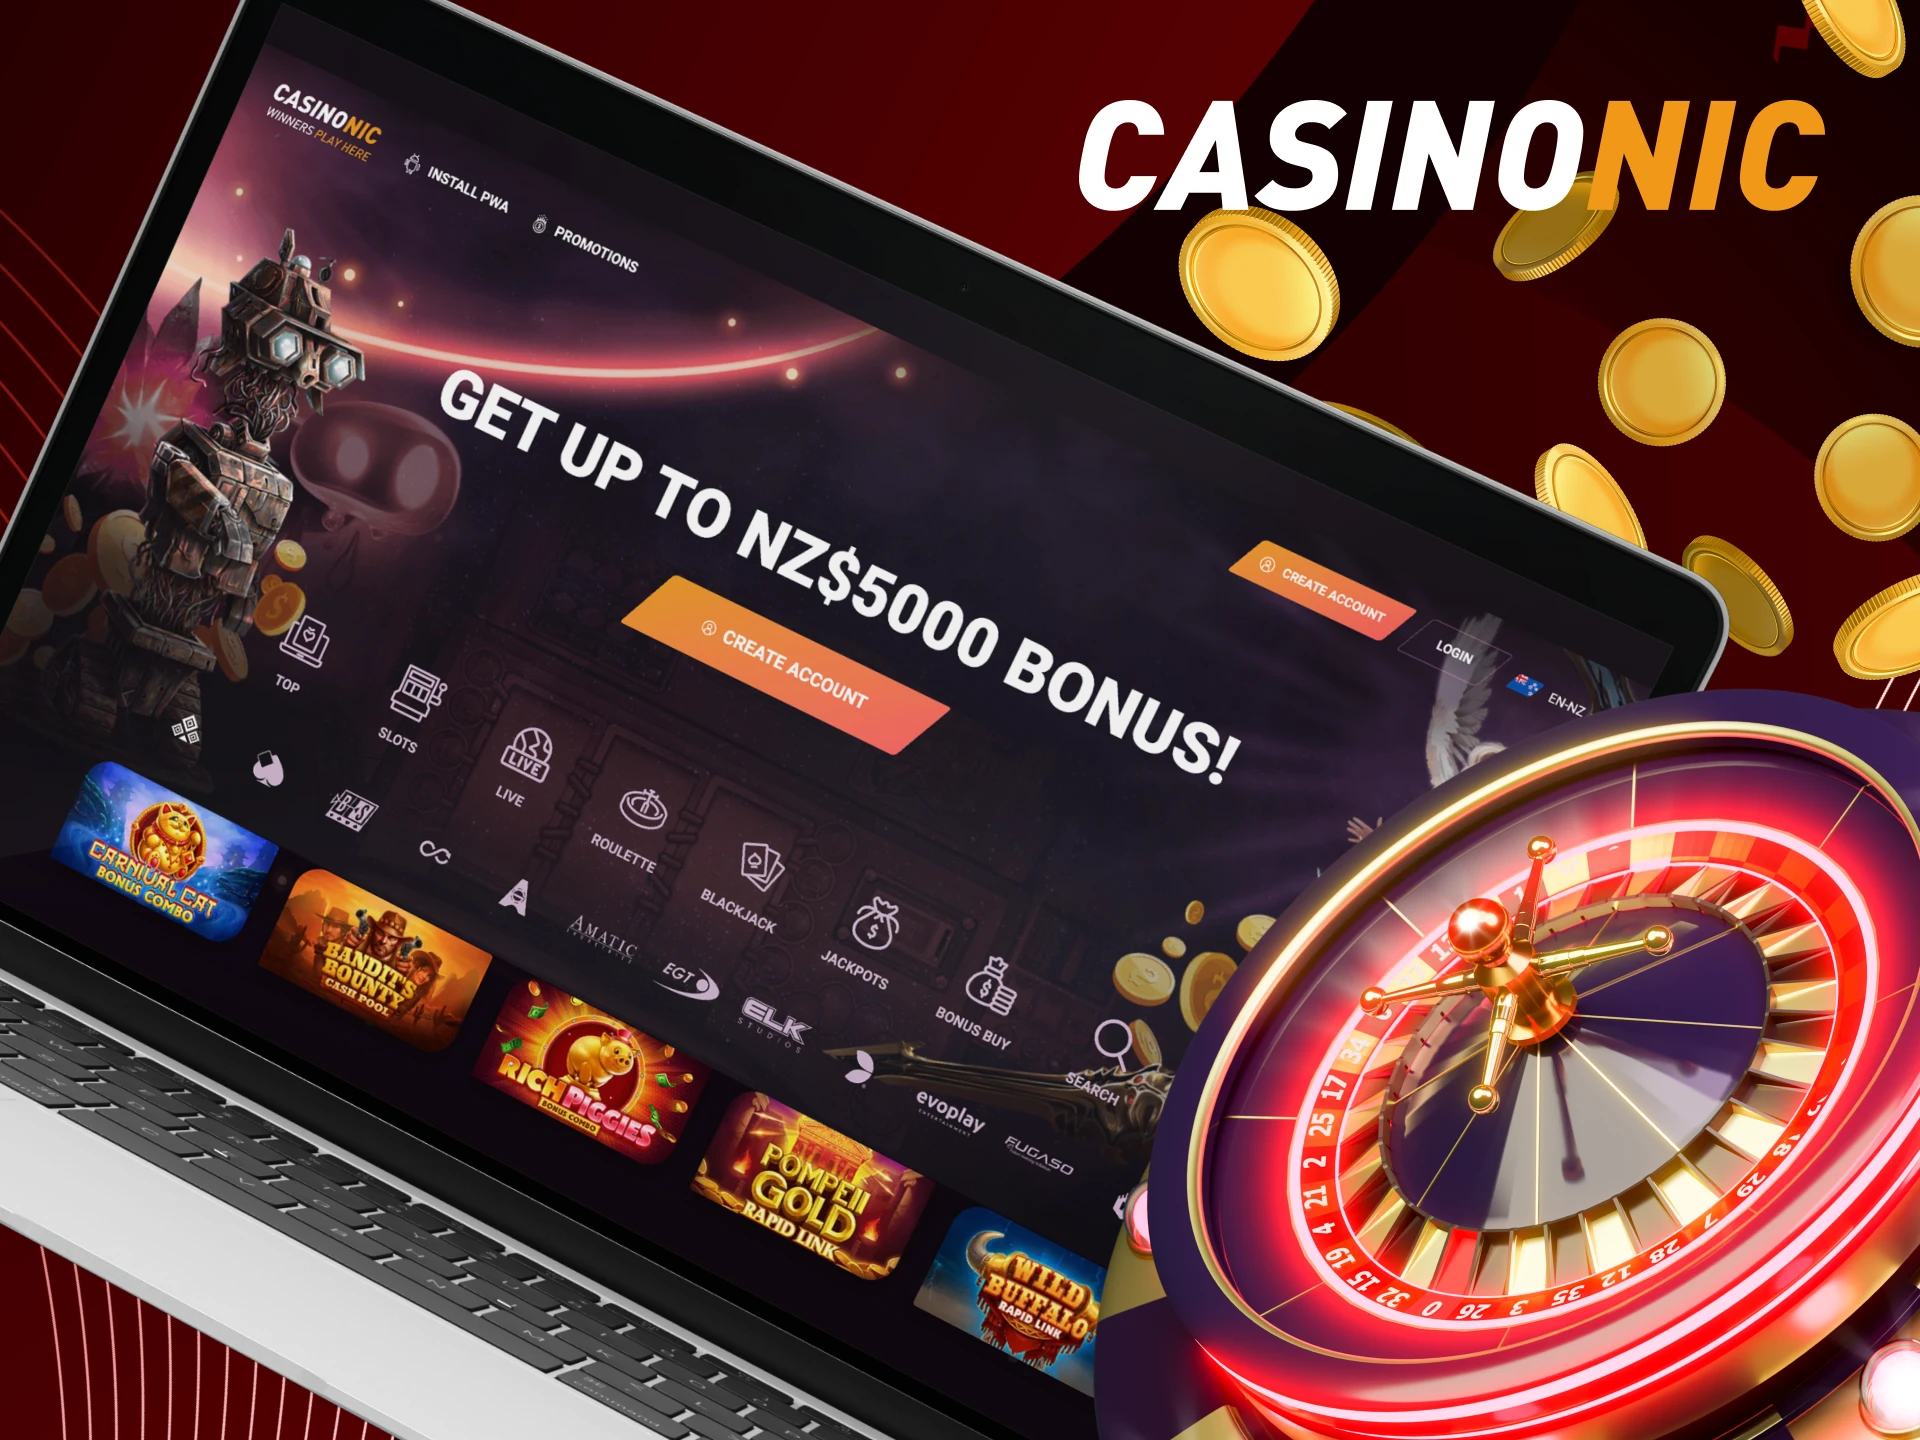 Online casino CasinoNic offers players a large number of different games and bonuses.